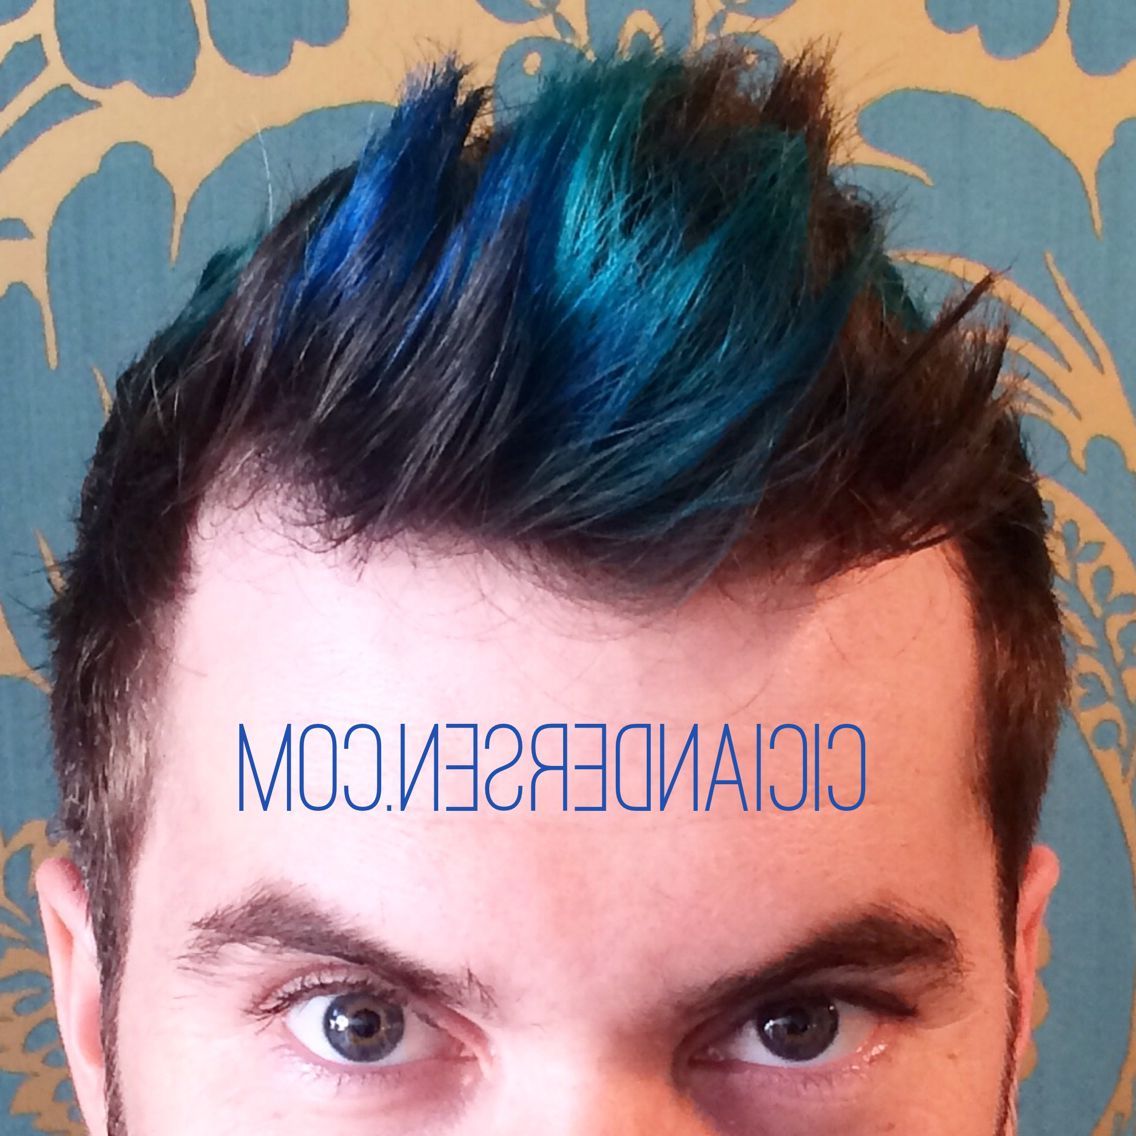 Newest Mohawk Hairstyles With Length And Frosted Tips With Teal And Blue Highlights For Men! Merman Hair Is So In Right Now (Gallery 19 of 20)